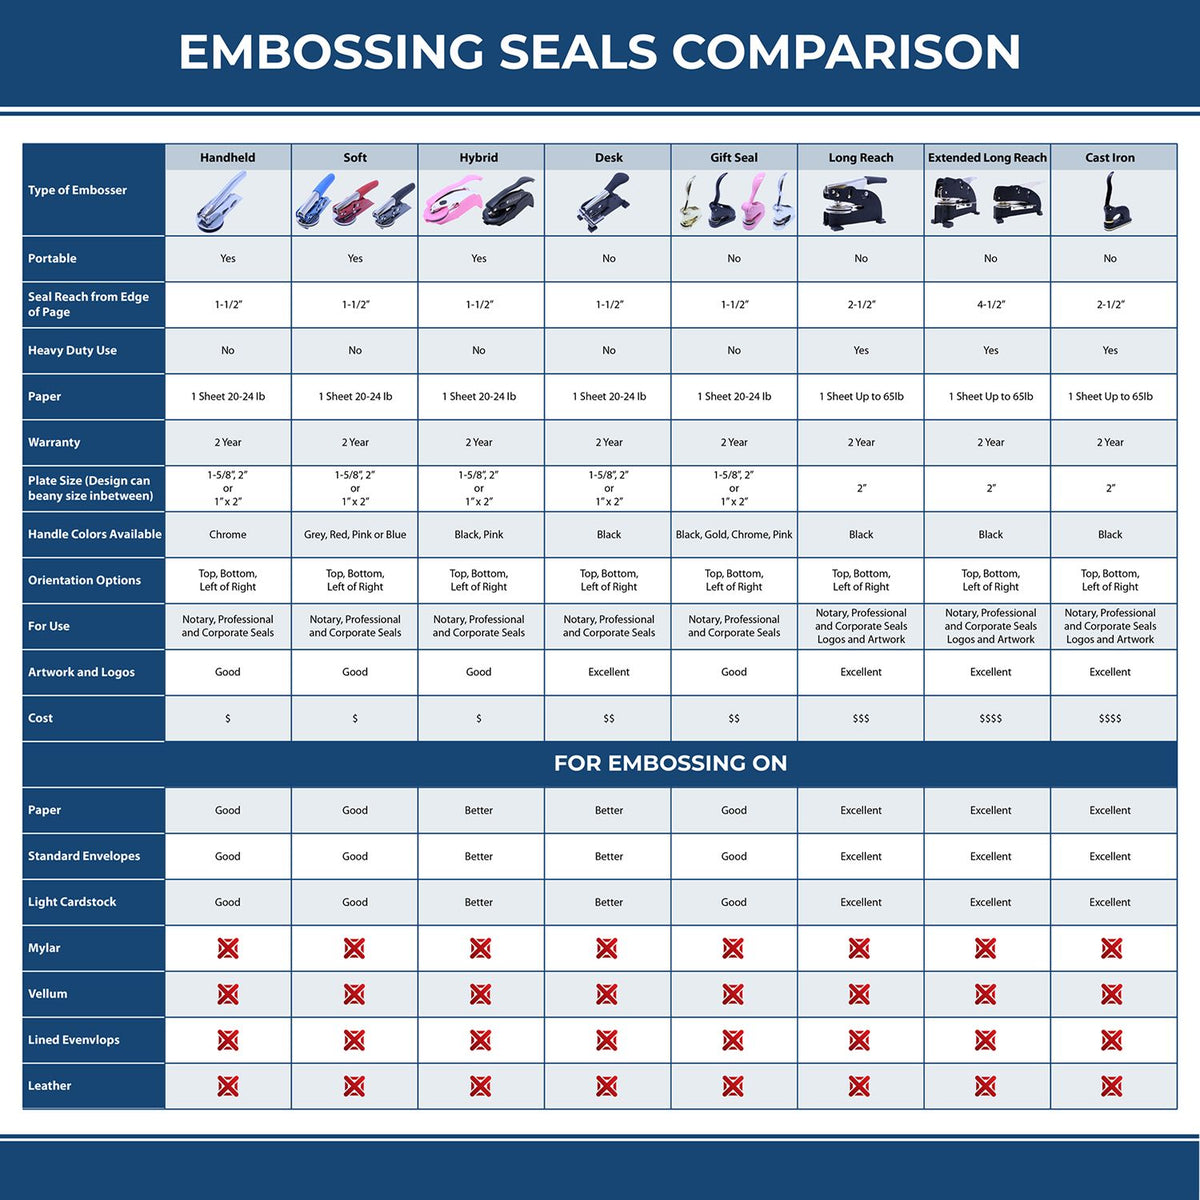 A comparison chart for the different types of mount models available for the Handheld Rhode Island Architect Seal Embosser.